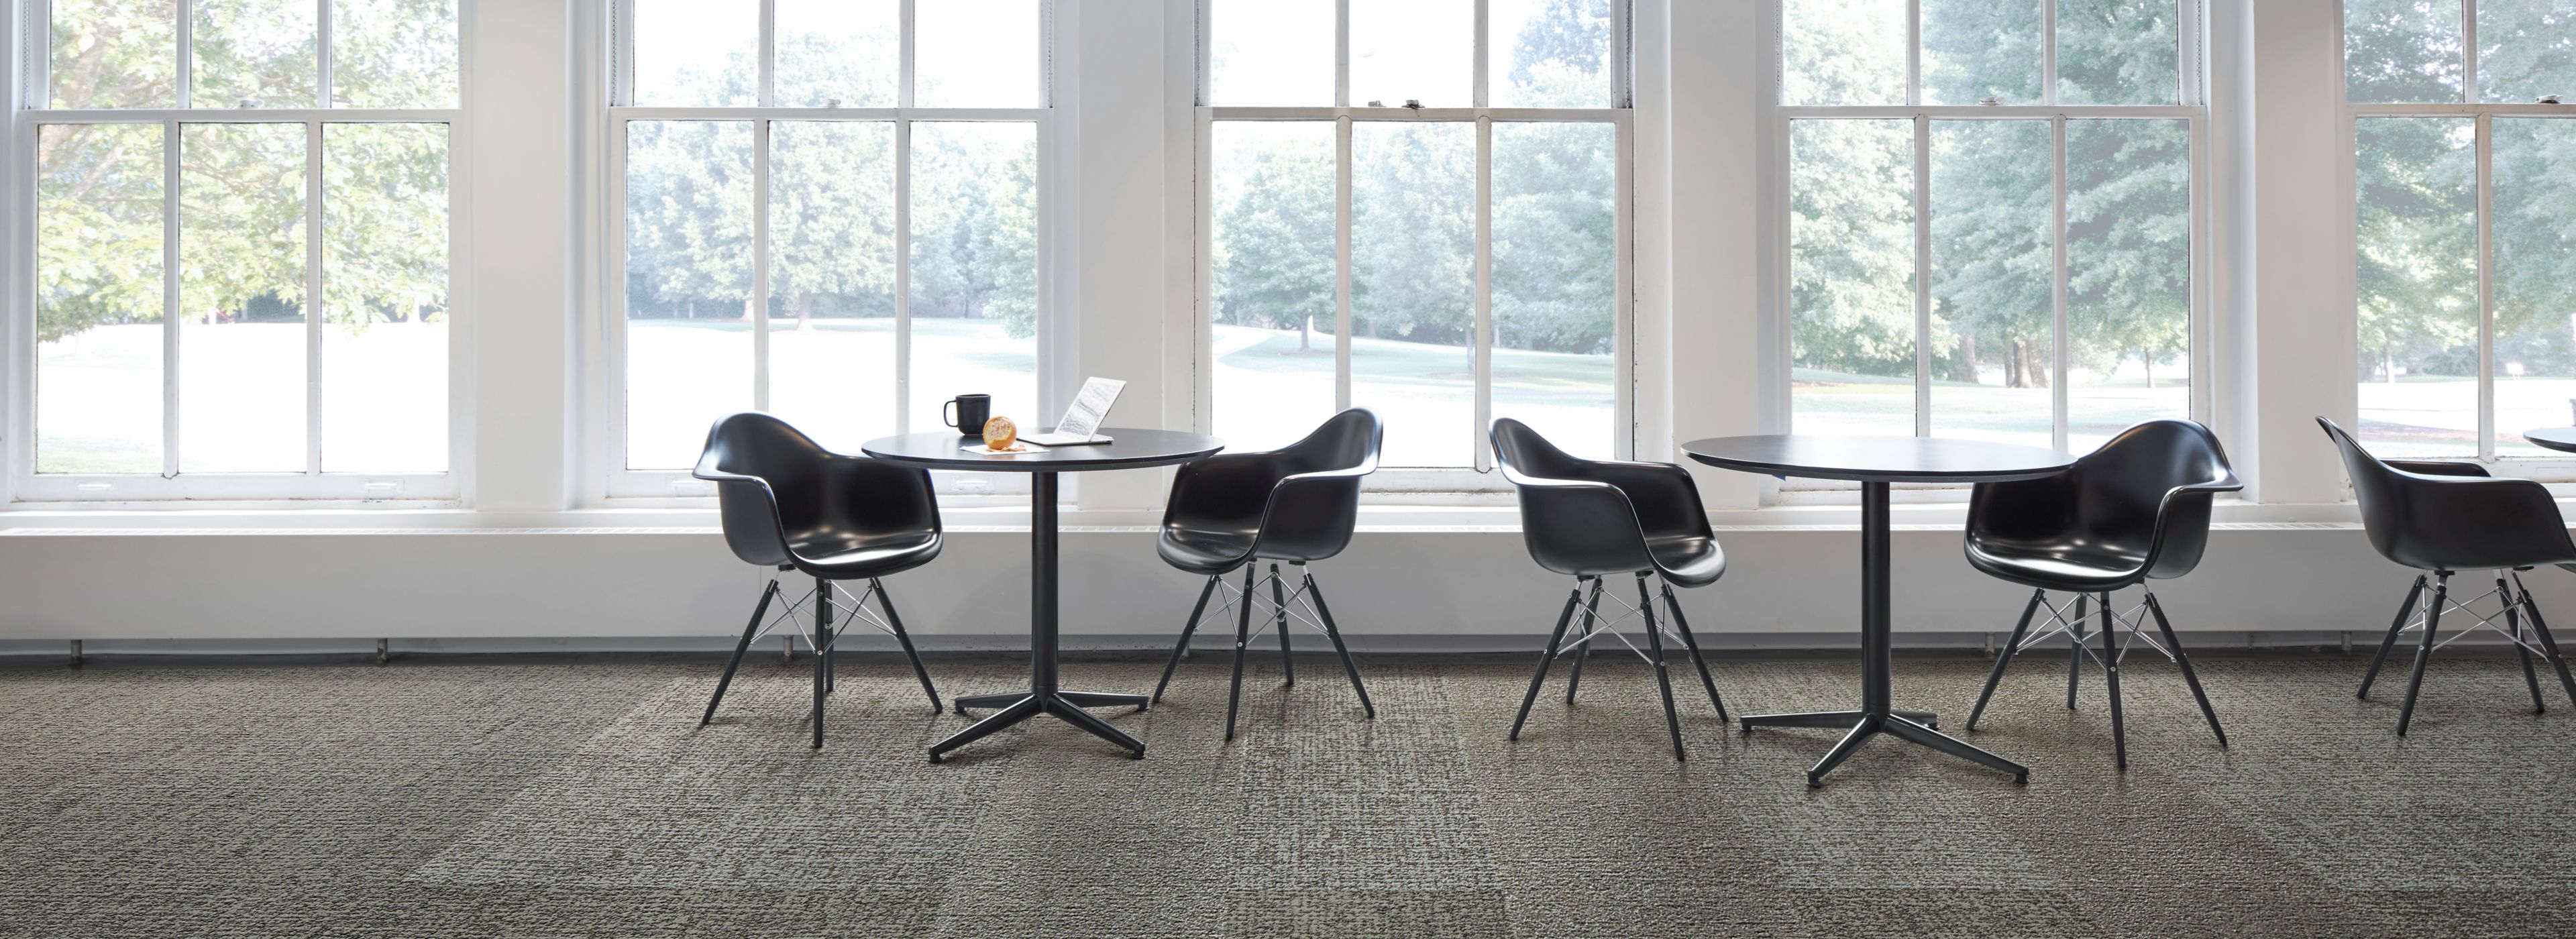 Interface Gridlock carpet tile with small tables against a wall of windows image number 1